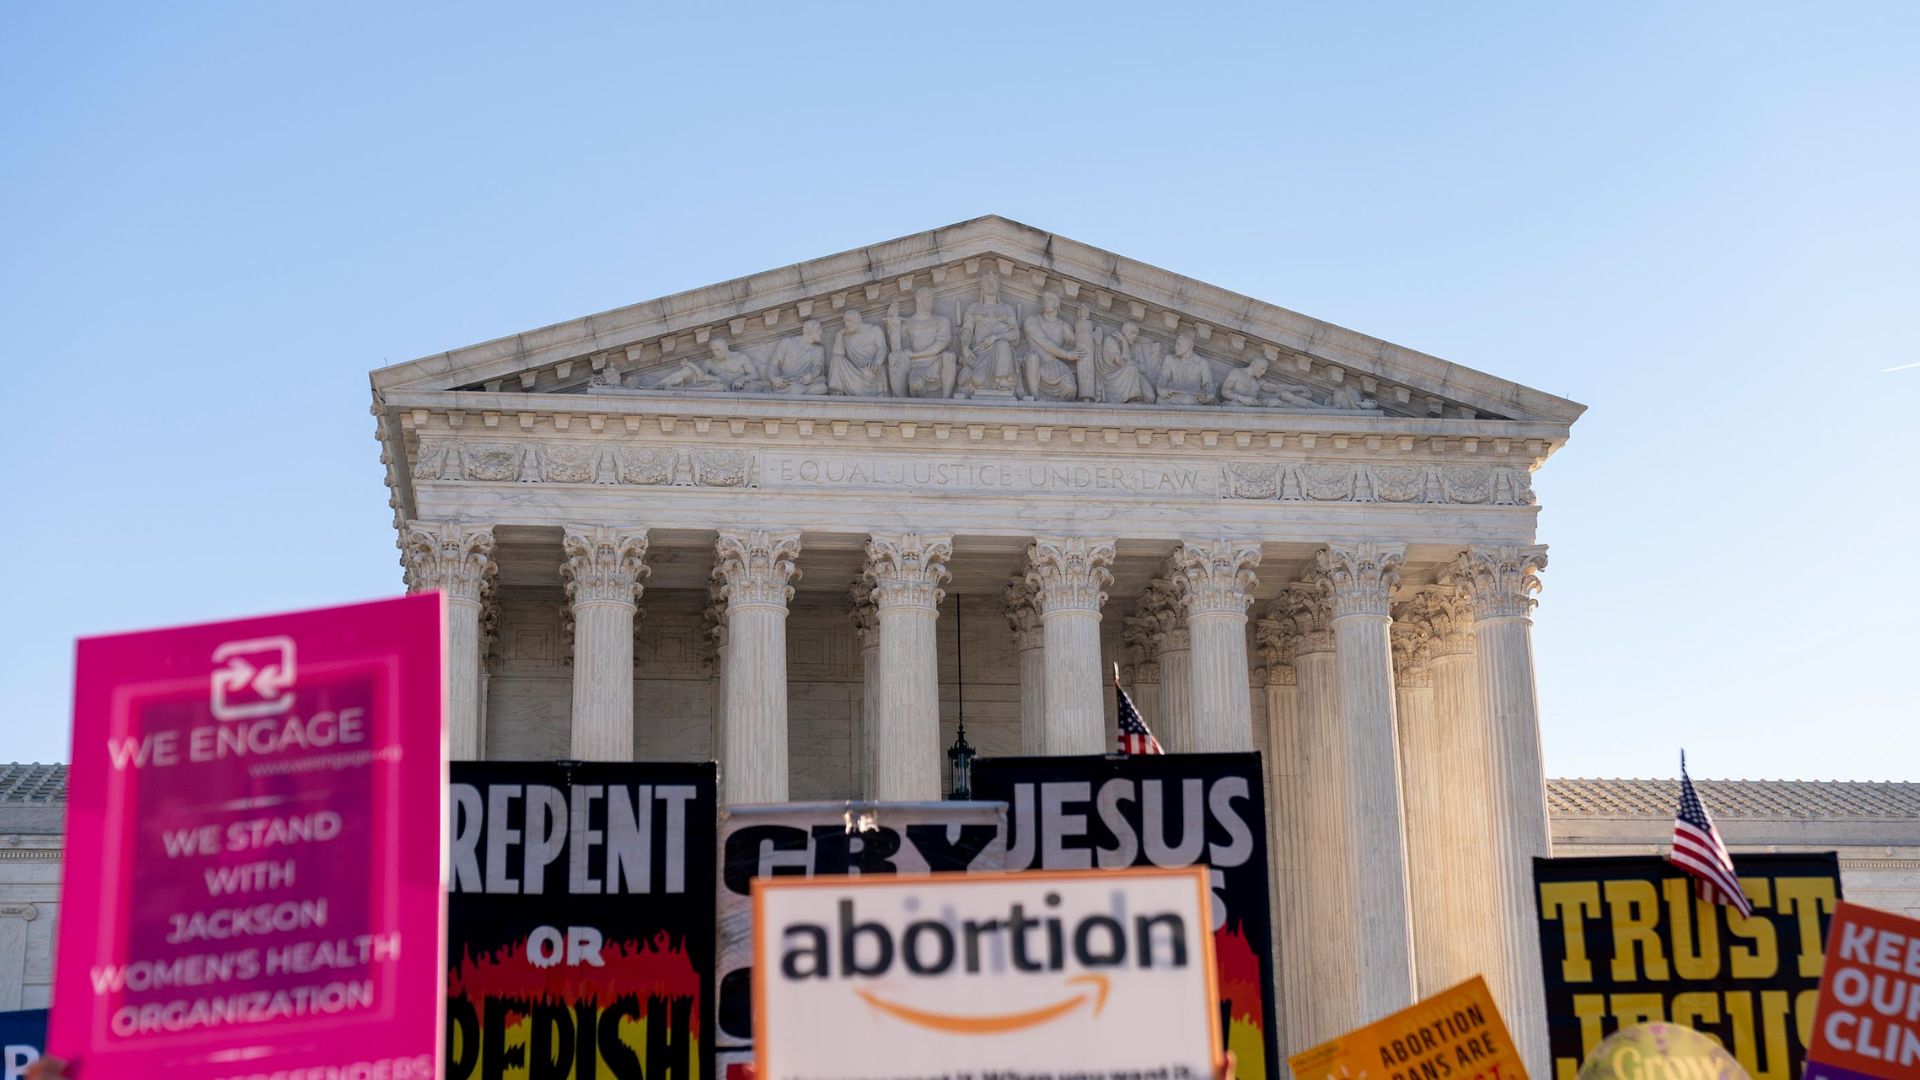 Supreme Court justices are expected to overturn Roe v. Wade, according to leak